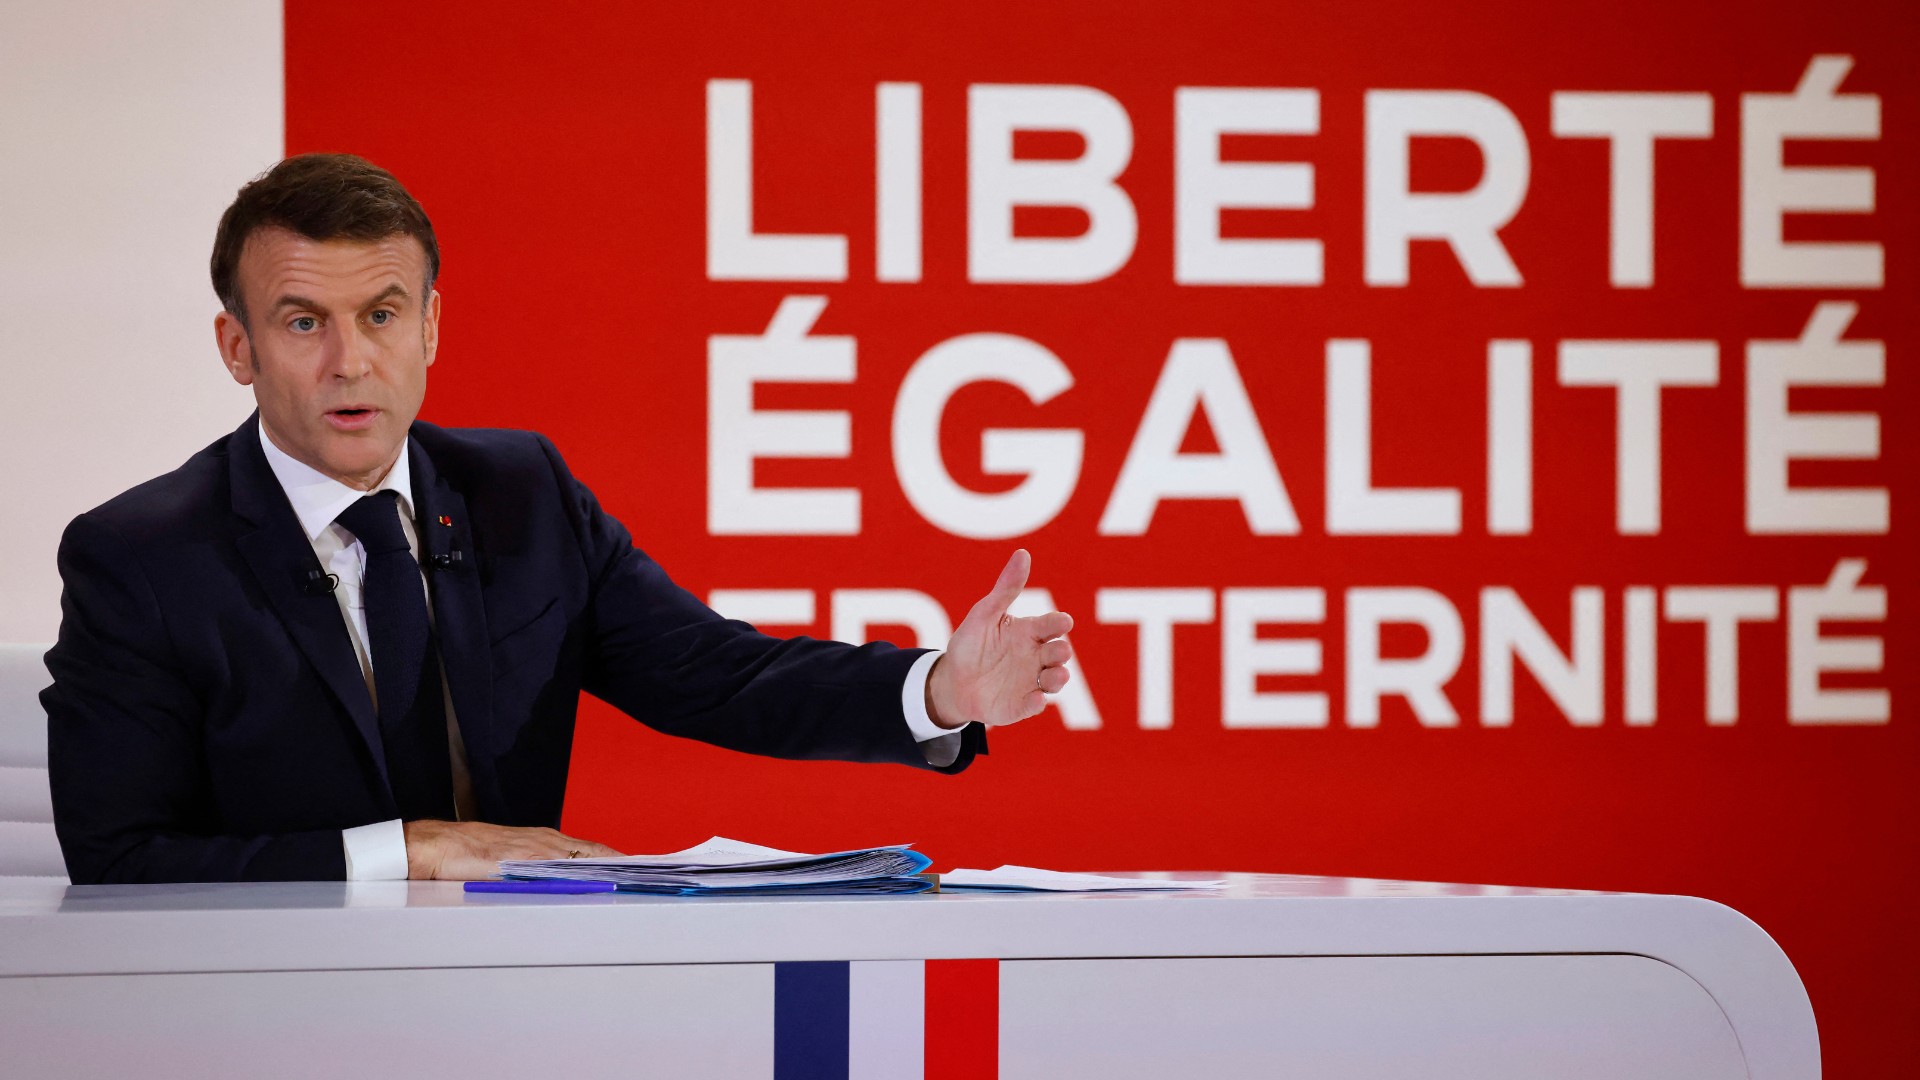 Emmanuel Macron held a two-and-a-half hour news conference to outline plans for his second term./Ludovic Marin/AFP